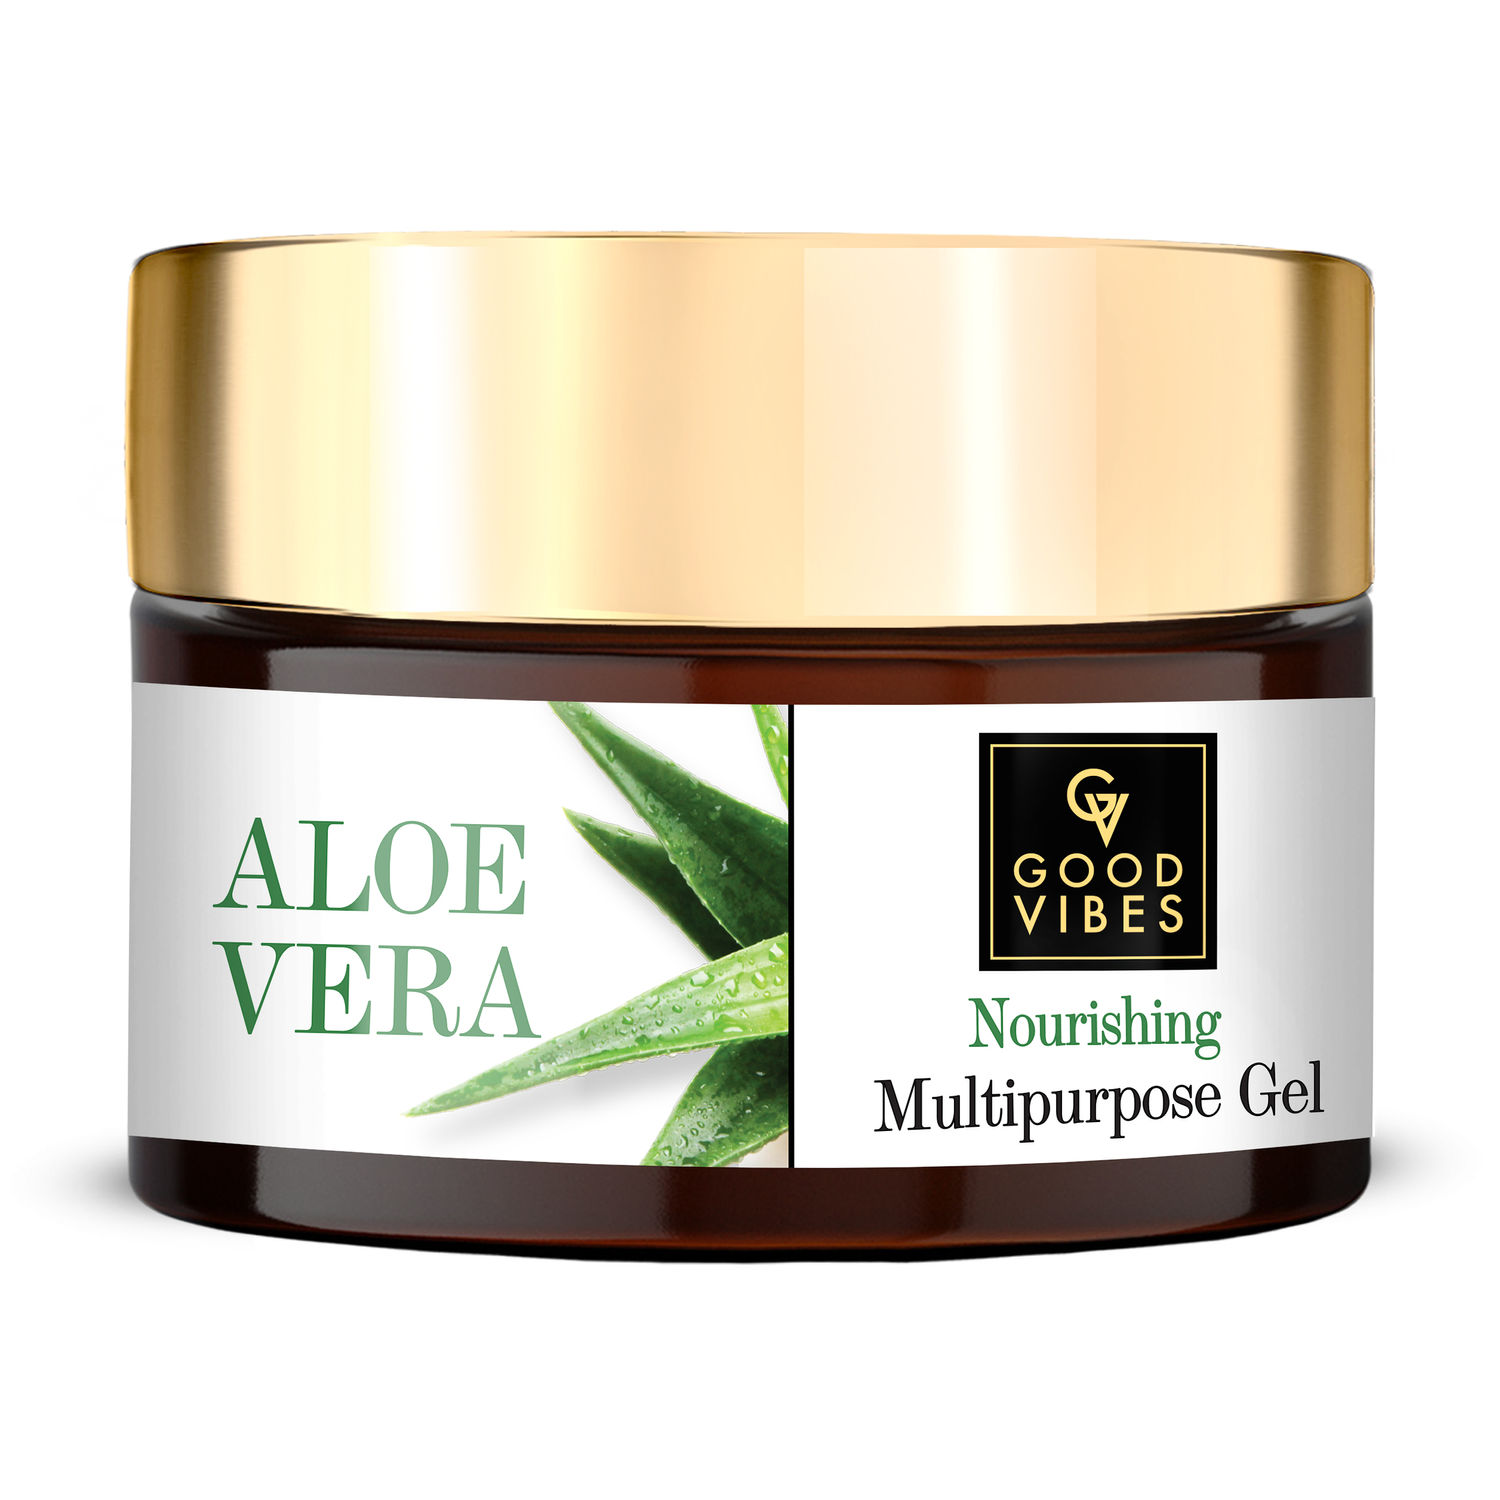 Good Vibes Aloe Vera Nourishing Multipurpose Gel | Anti-Acne, Ageing | With Neem | No Parabens, No Sulphates, No Mineral Oil, No Animal Testing (50 g)